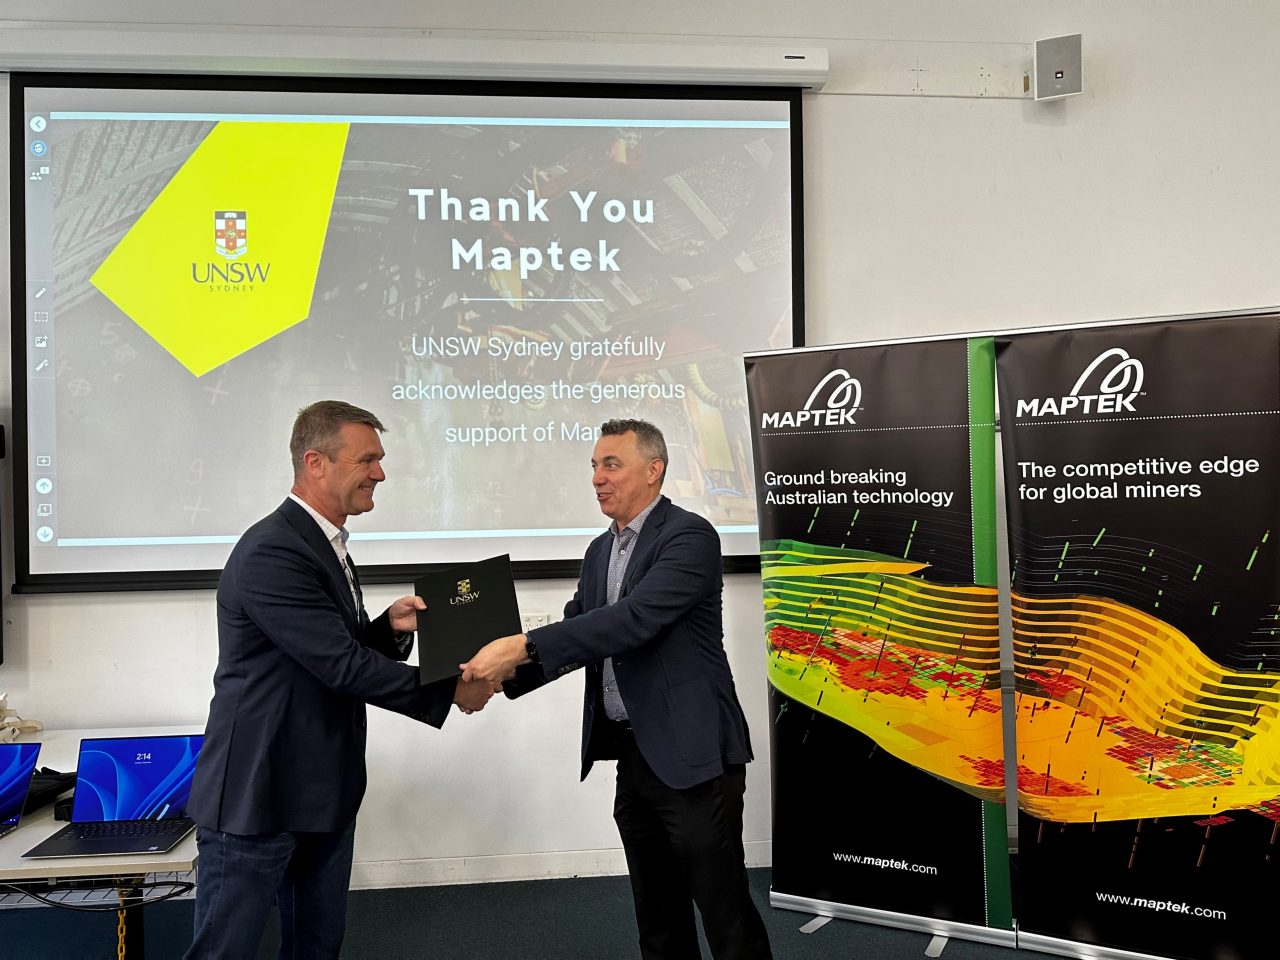 Maptek chairman Peter Johnson receiving the donation acknowledgement from UNSW Professor Maurice Pagnucco.